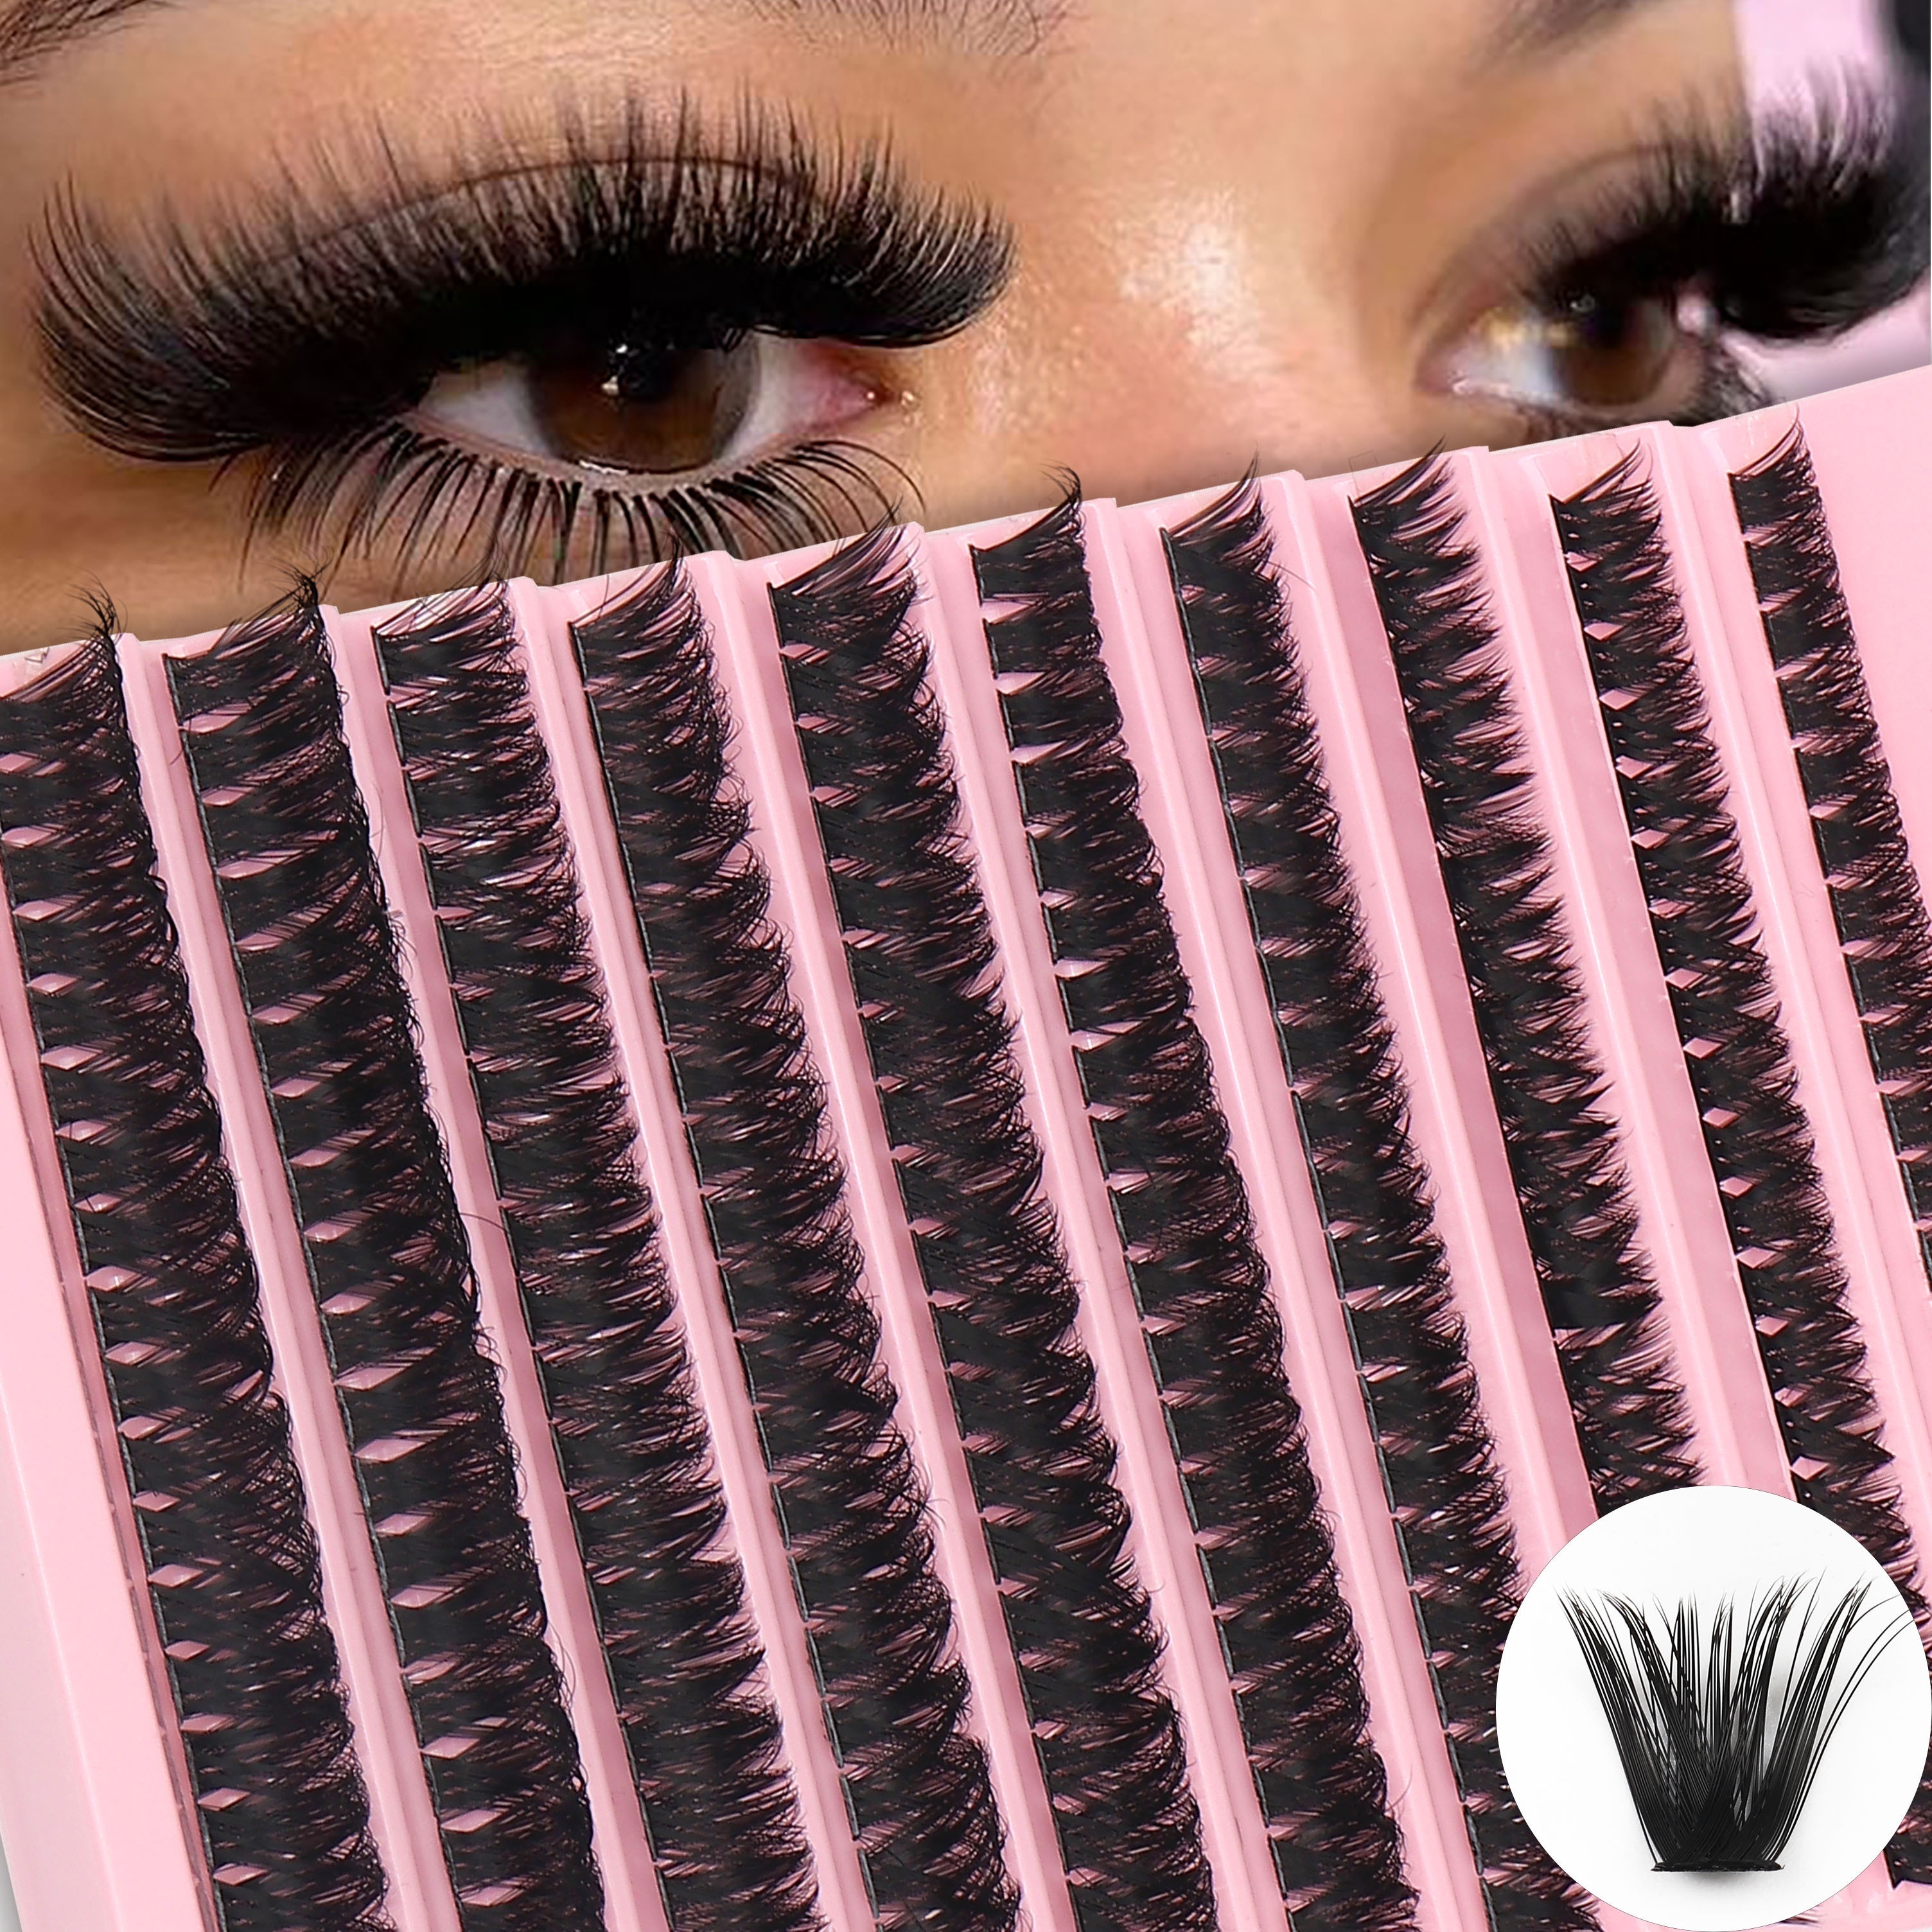 

10 Rows Of 20 Clusters Of 3d Personal Eyelashes For Lash Extension, Suitable For Beginners And Daily Use - Available In 10-12mm, 13-15mm, And 16-18mm Lengths